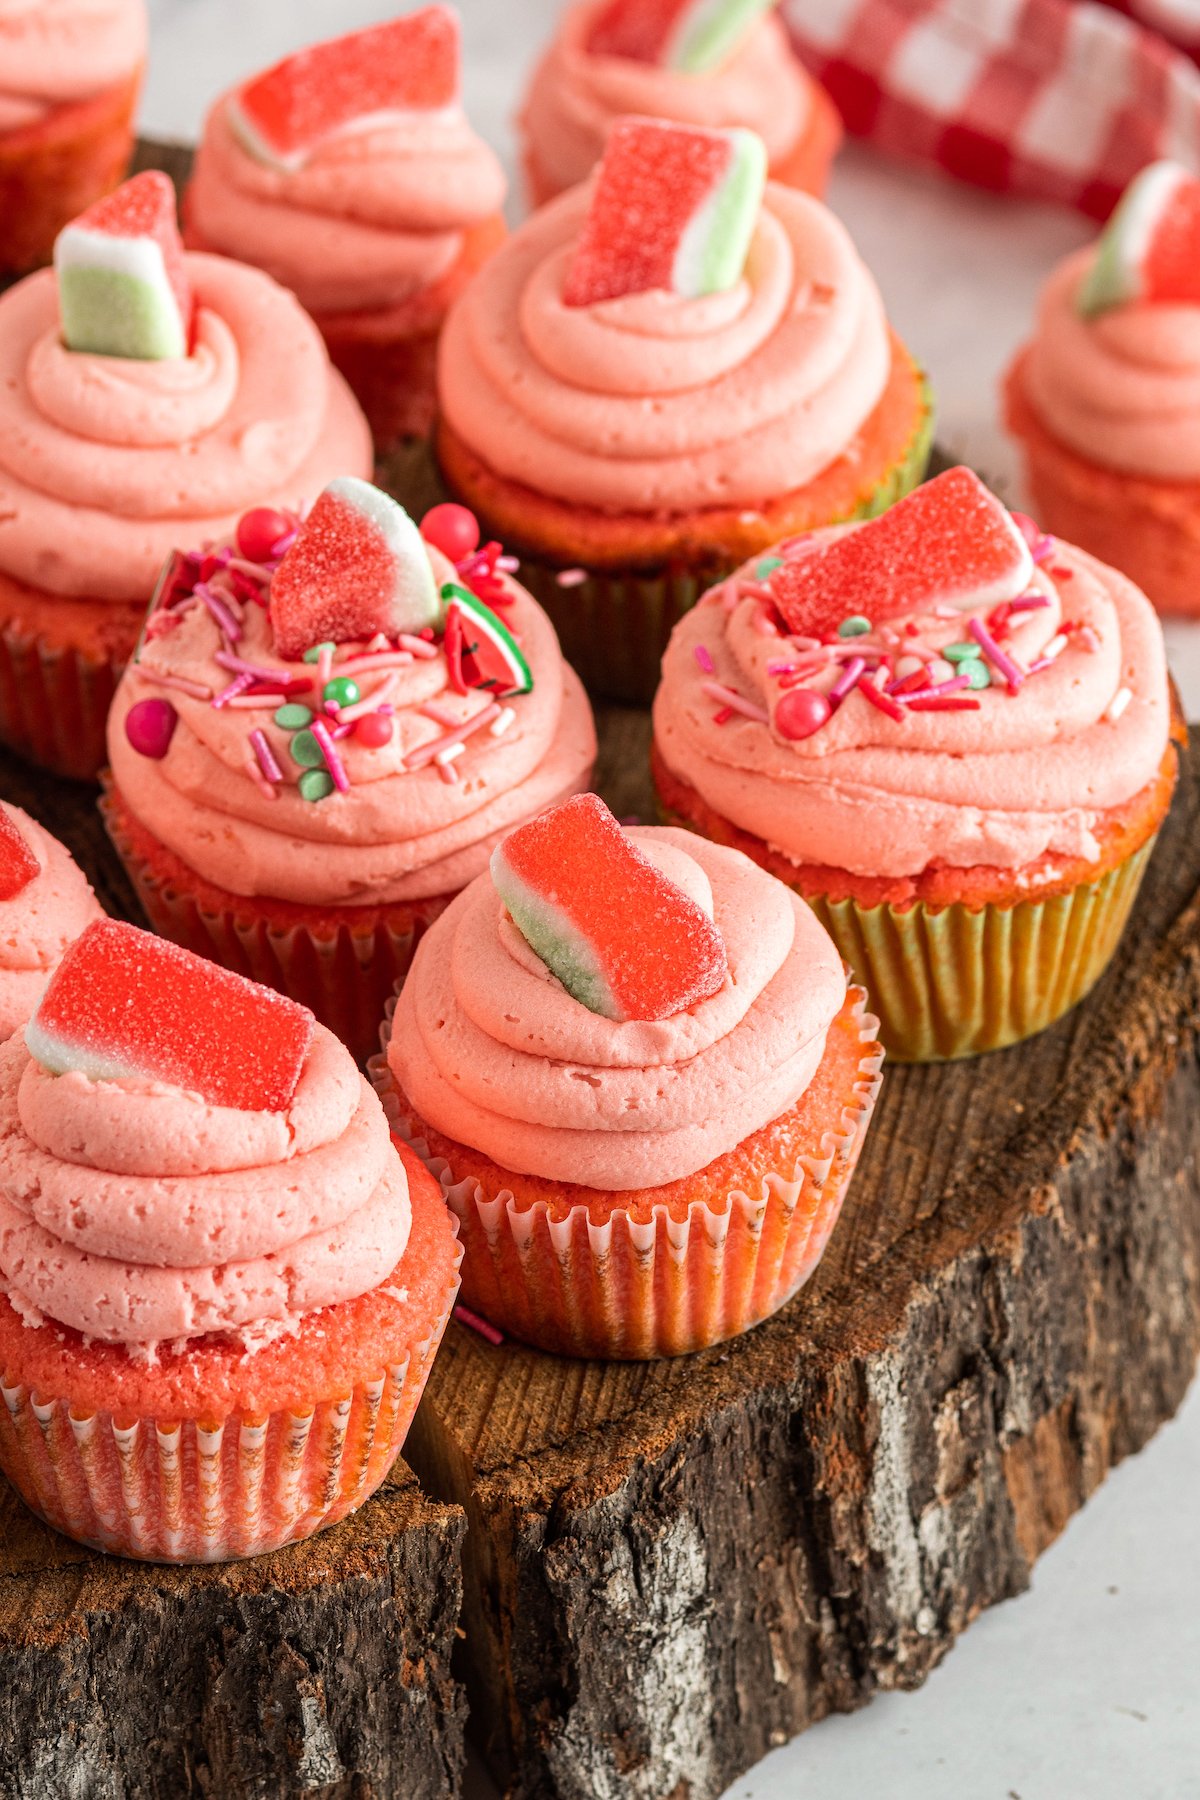 Pink frosted and decorated watermelon cupcakes on a wooden platter.